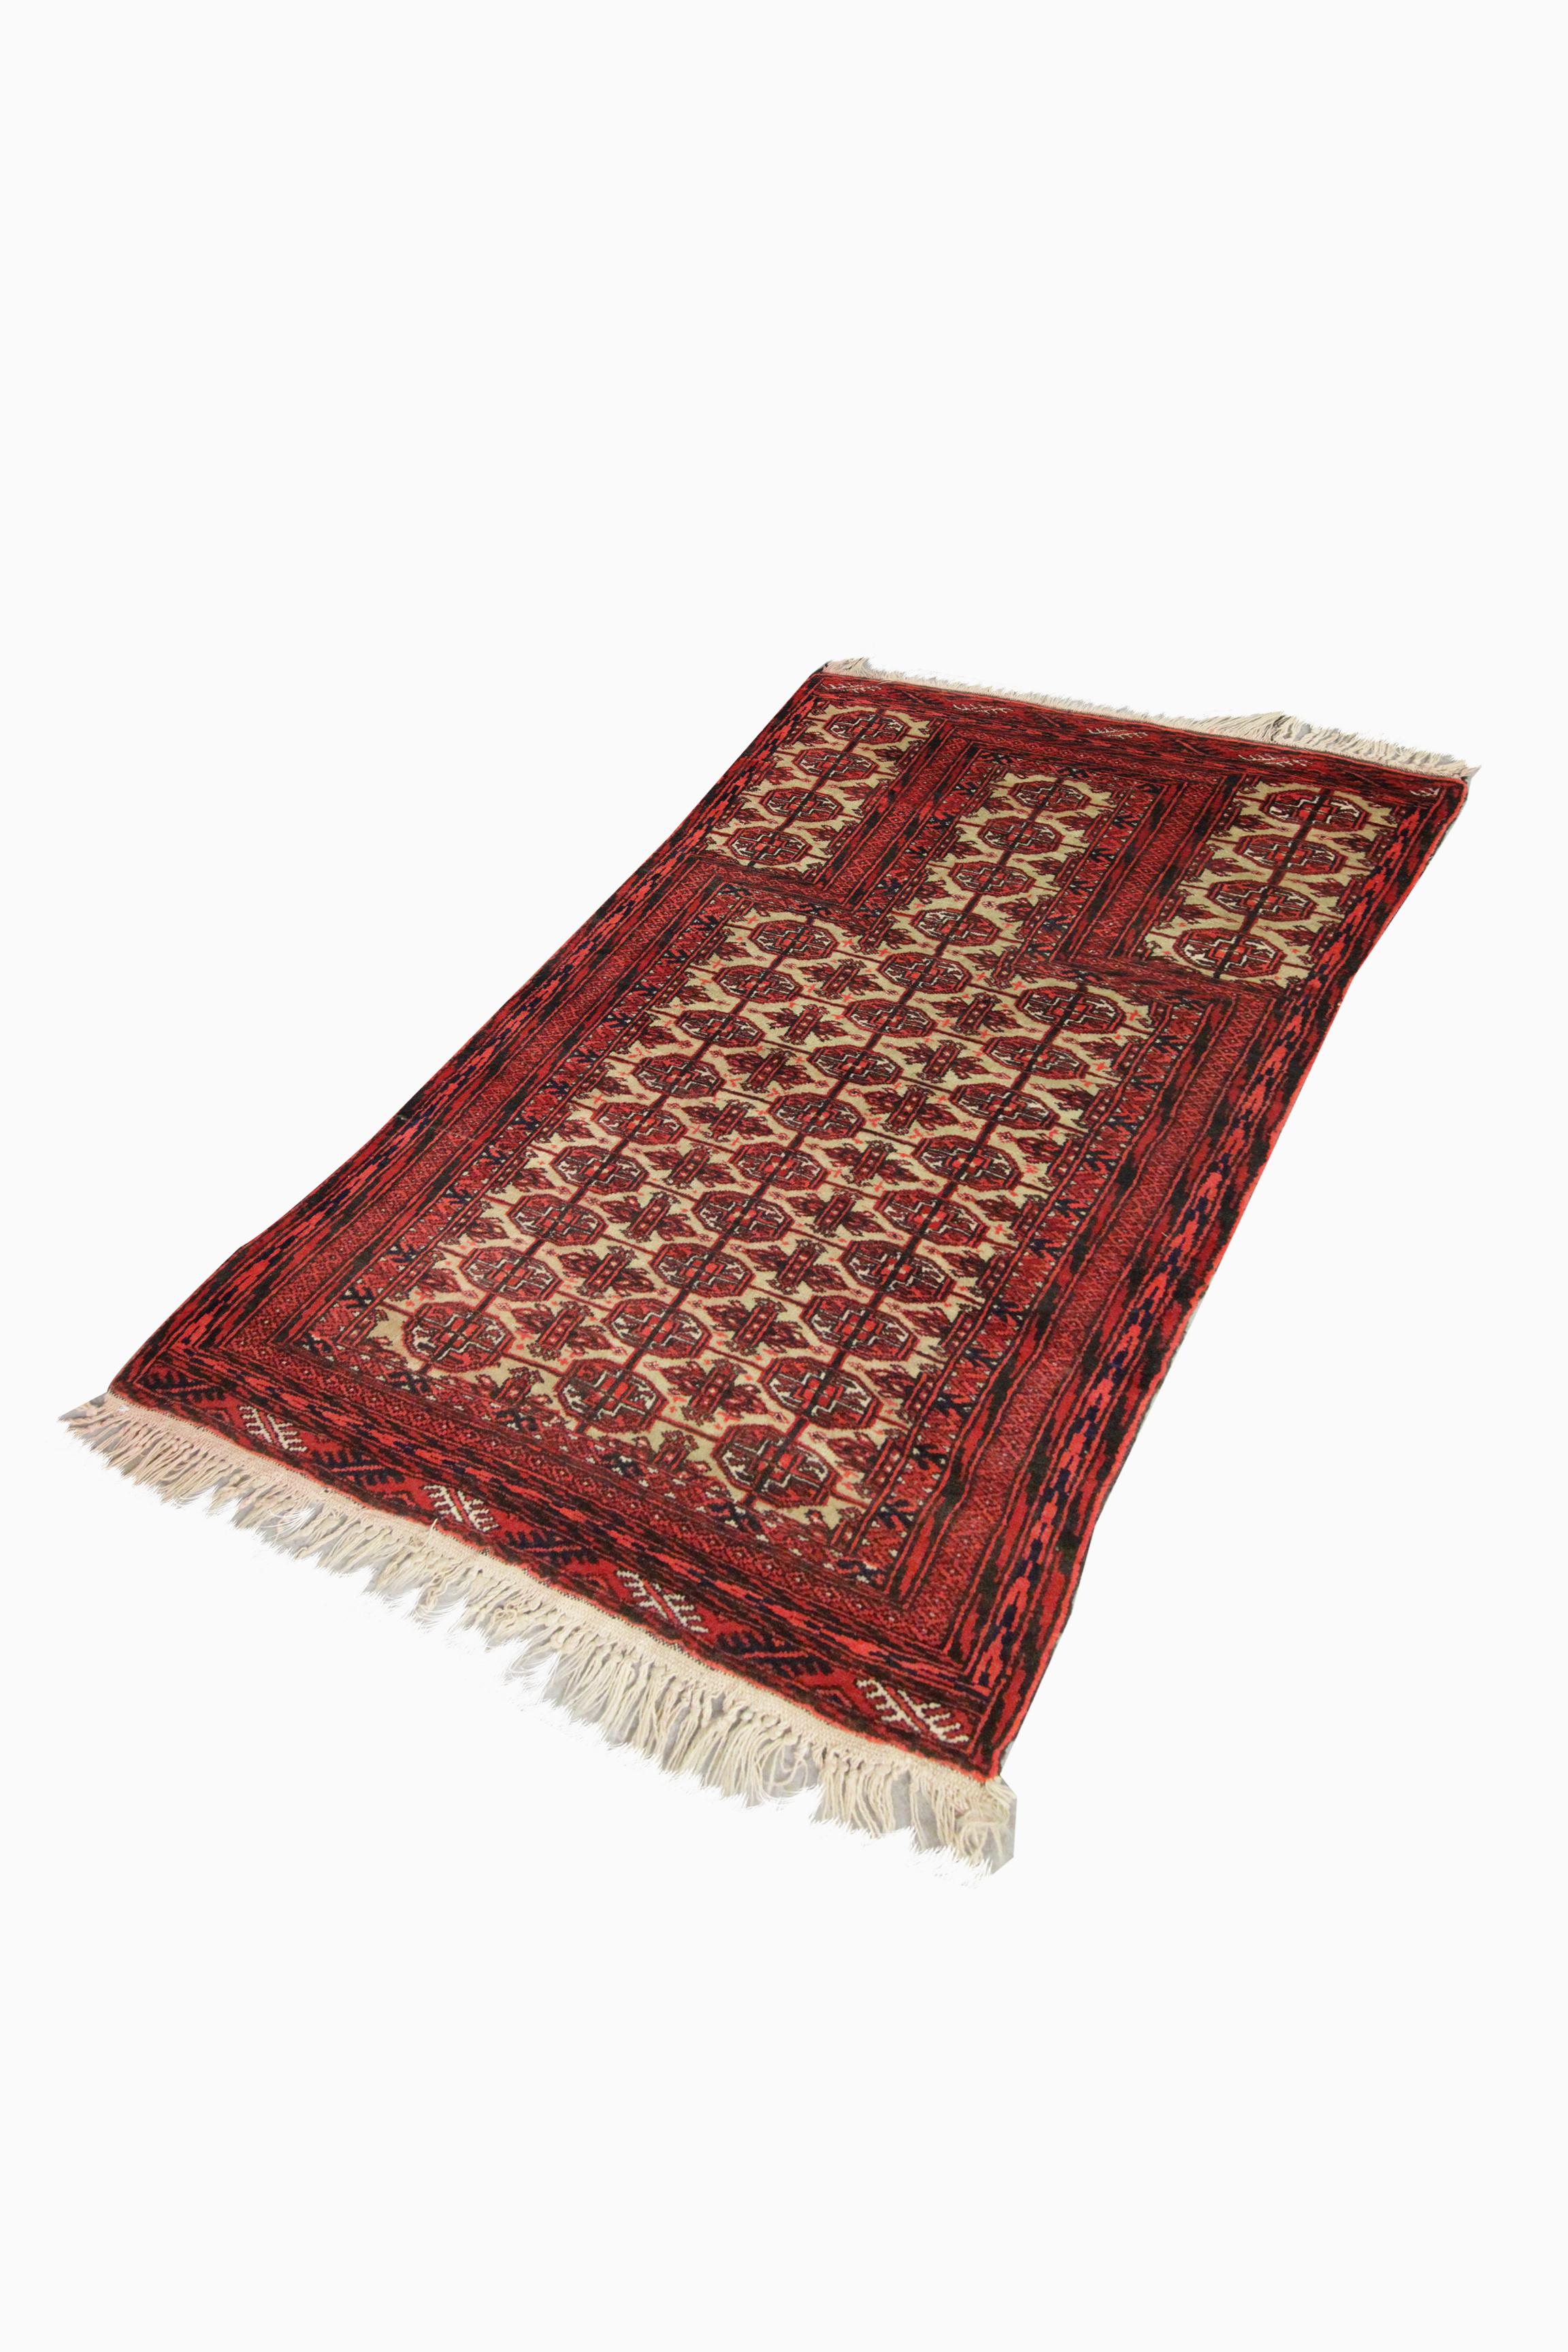 Tribal Small Vintage Living Room Rug Traditional Handwoven Oriental Wool Rug For Sale